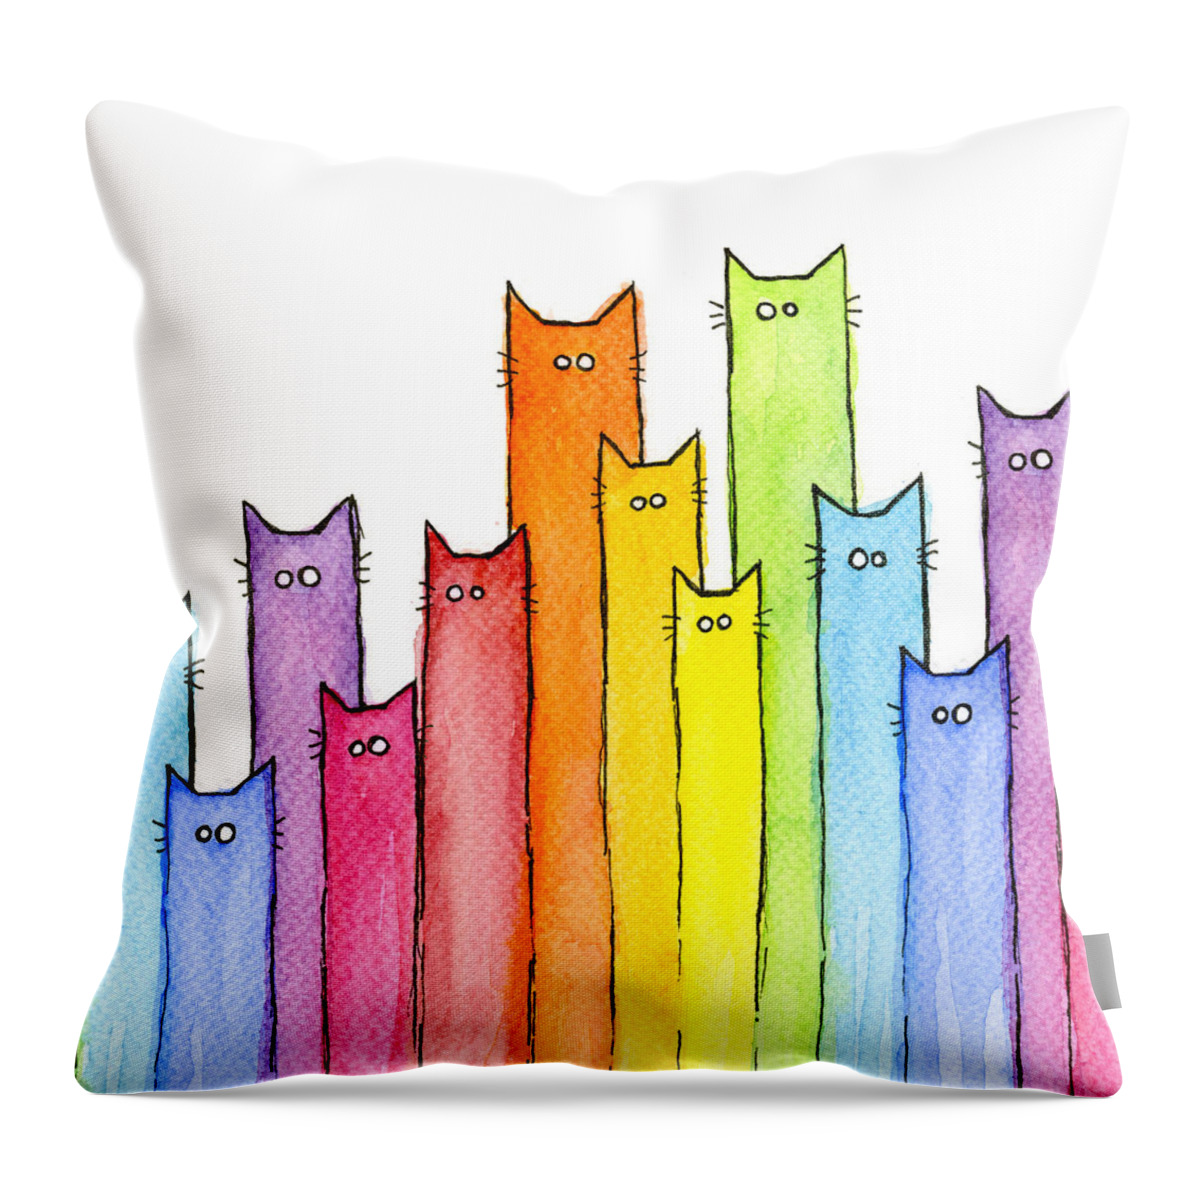 Watercolor Throw Pillow featuring the painting Rainbow of Cats by Olga Shvartsur